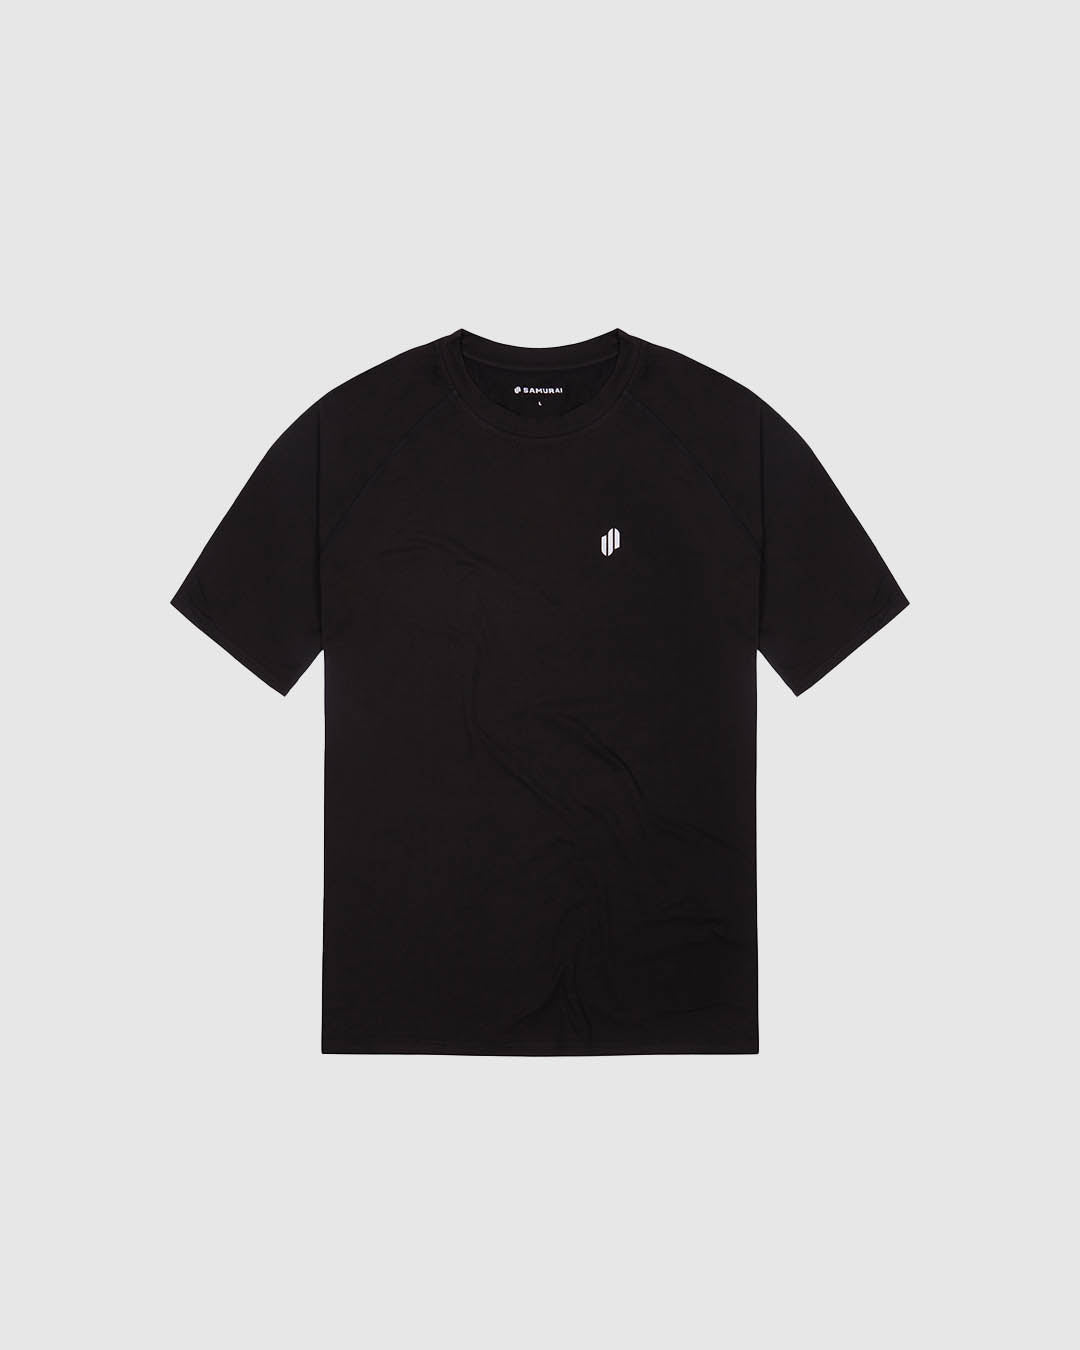 EE:S05 - Soft Touch T-Shirt - Black